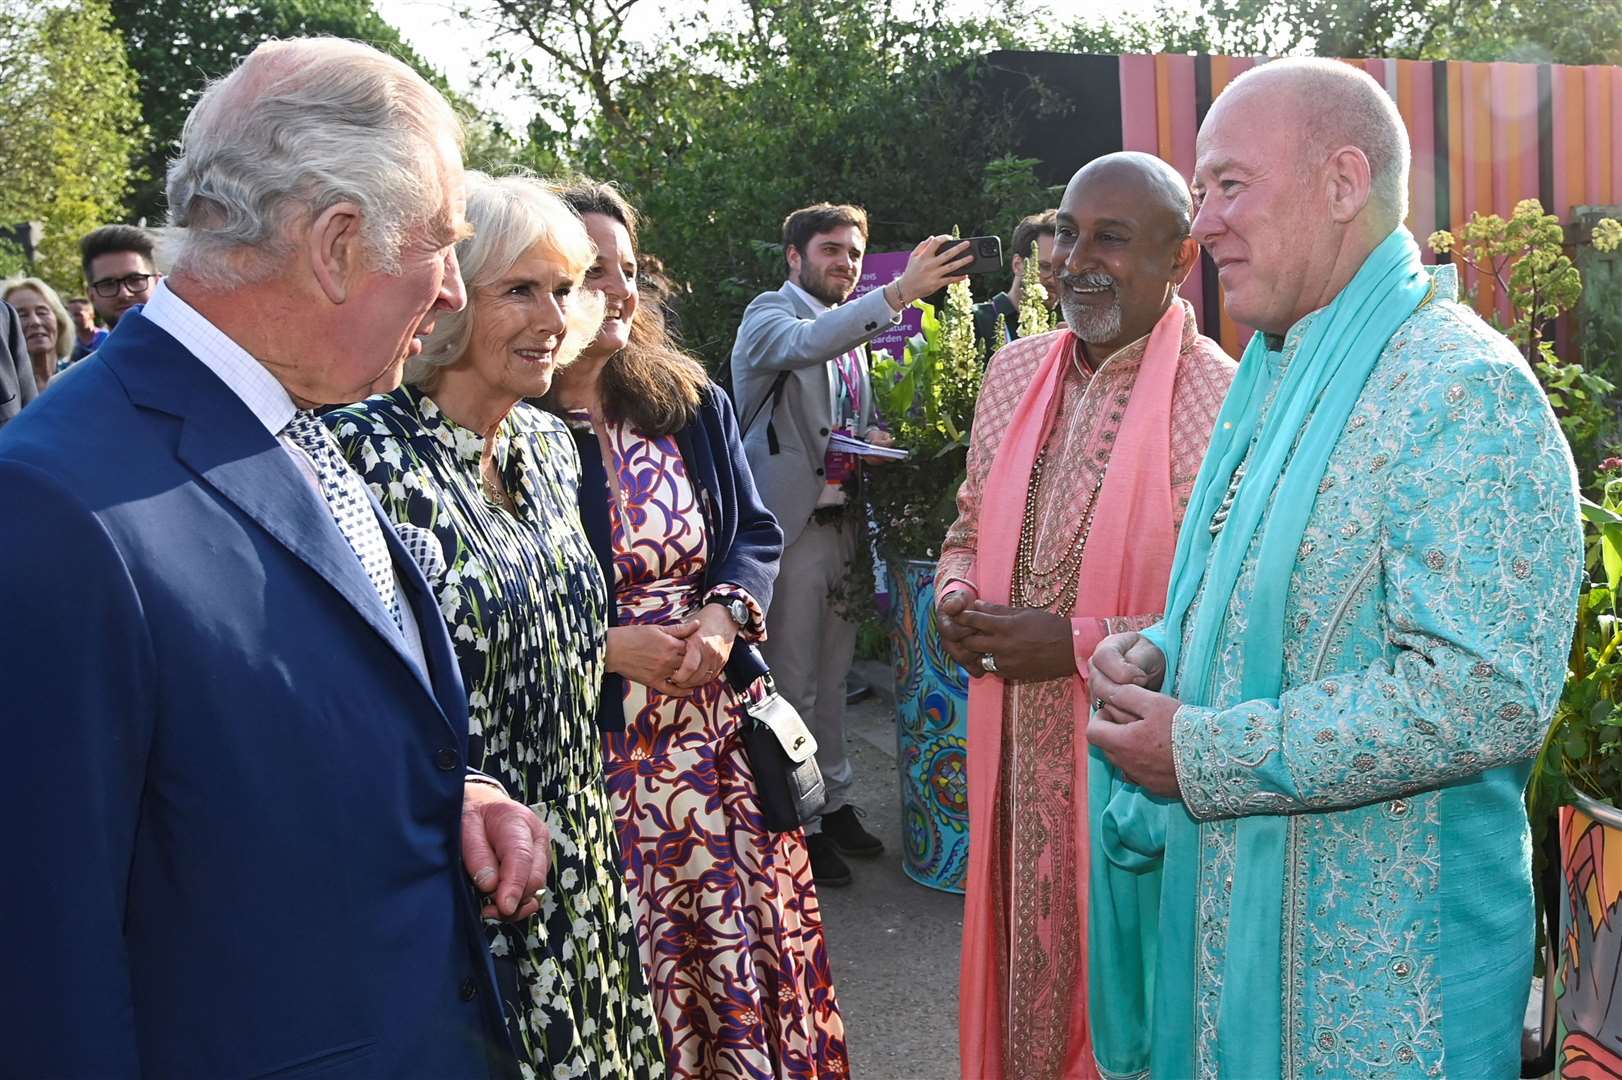 The King and Queen speak with Manoj Malde, an ambassador for inclusivity, and Clive Gillmor following their traditional Hindu ceremony marriage in the Eastern Eye Garden of Unity at Chelsea last year (Toby Melville/PA)